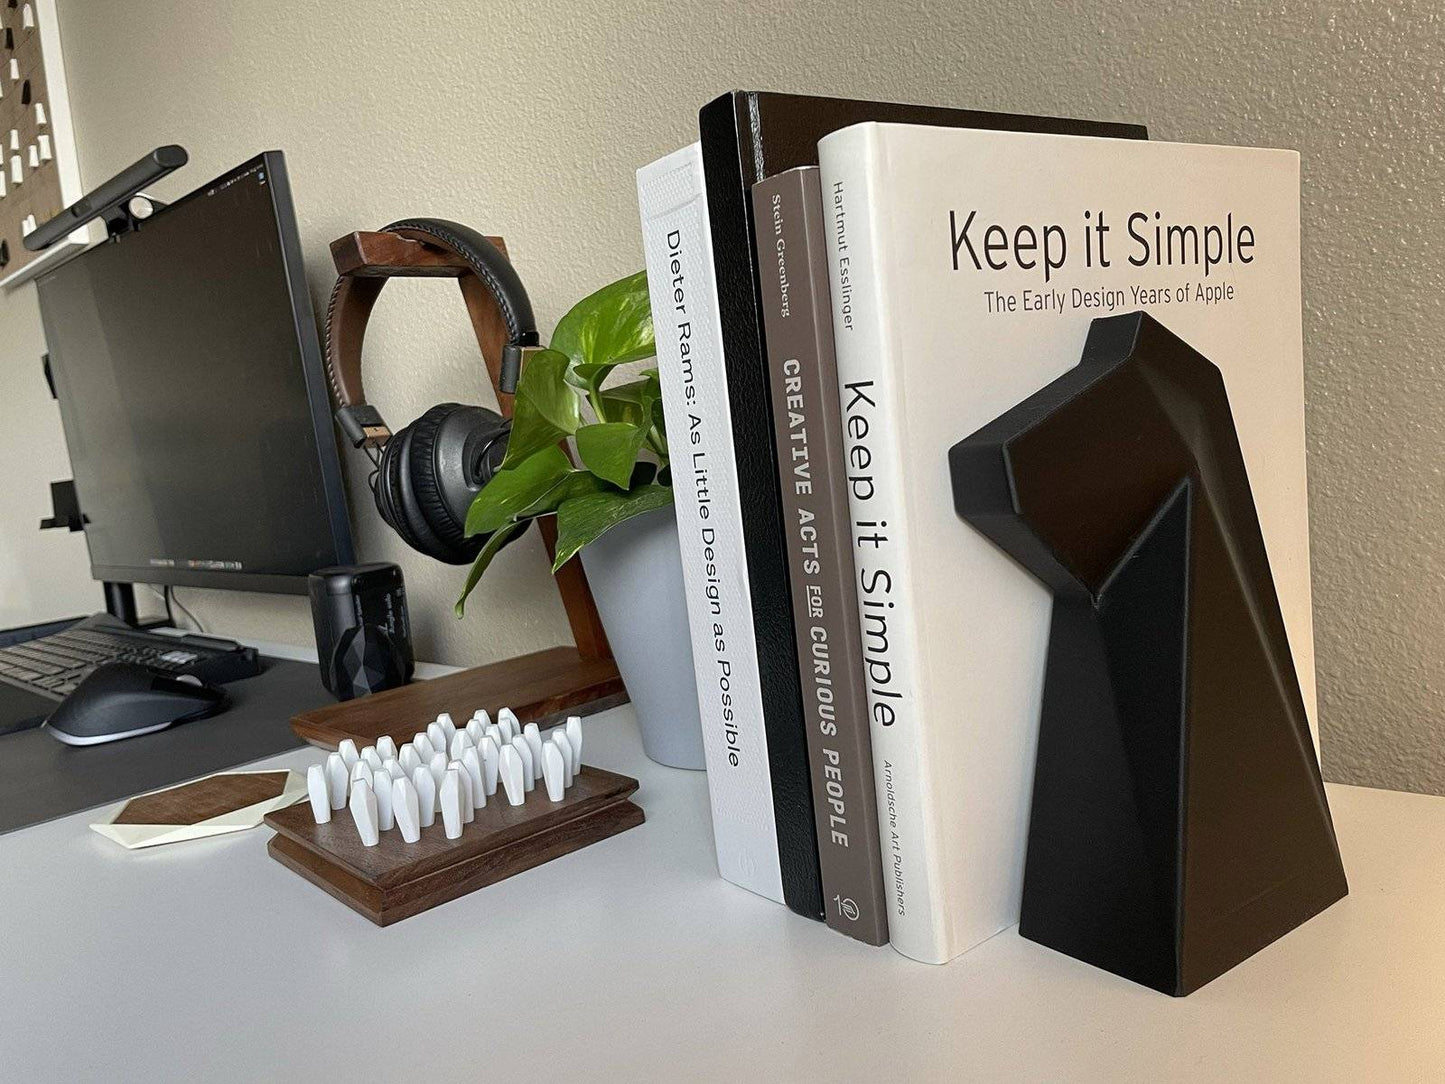 Chess Knight Bookends | Modern, Geometric, 3D Printed, Weighted | Home Decor | Bookends for Shelves, Bookstop, Book Holder | Unique Gift